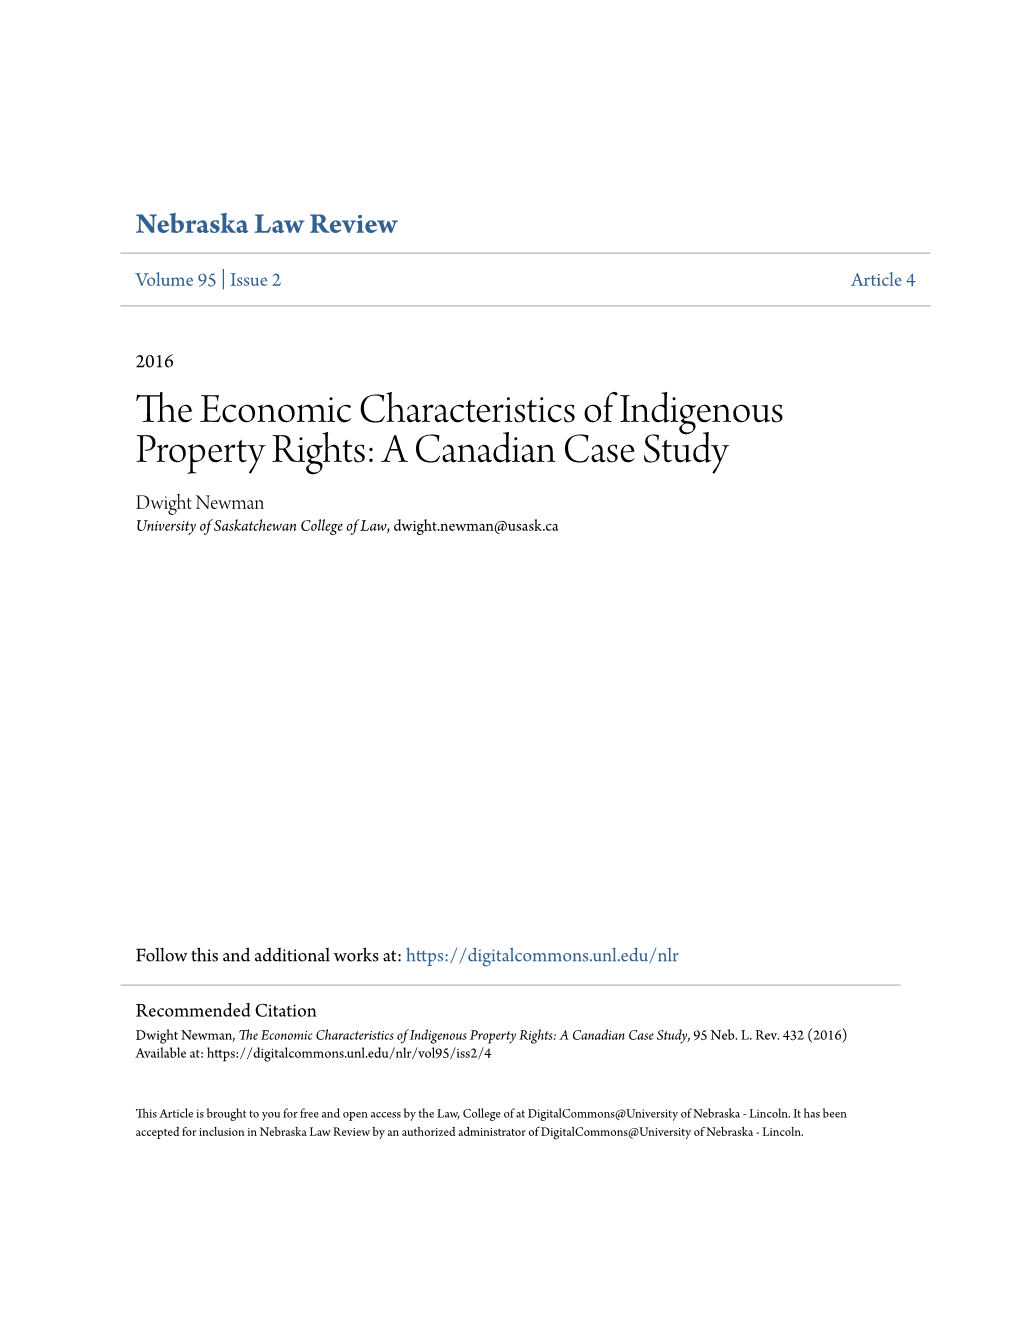 The Economic Characteristics of Indigenous Property Rights: a Canadian Case Study, 95 Neb